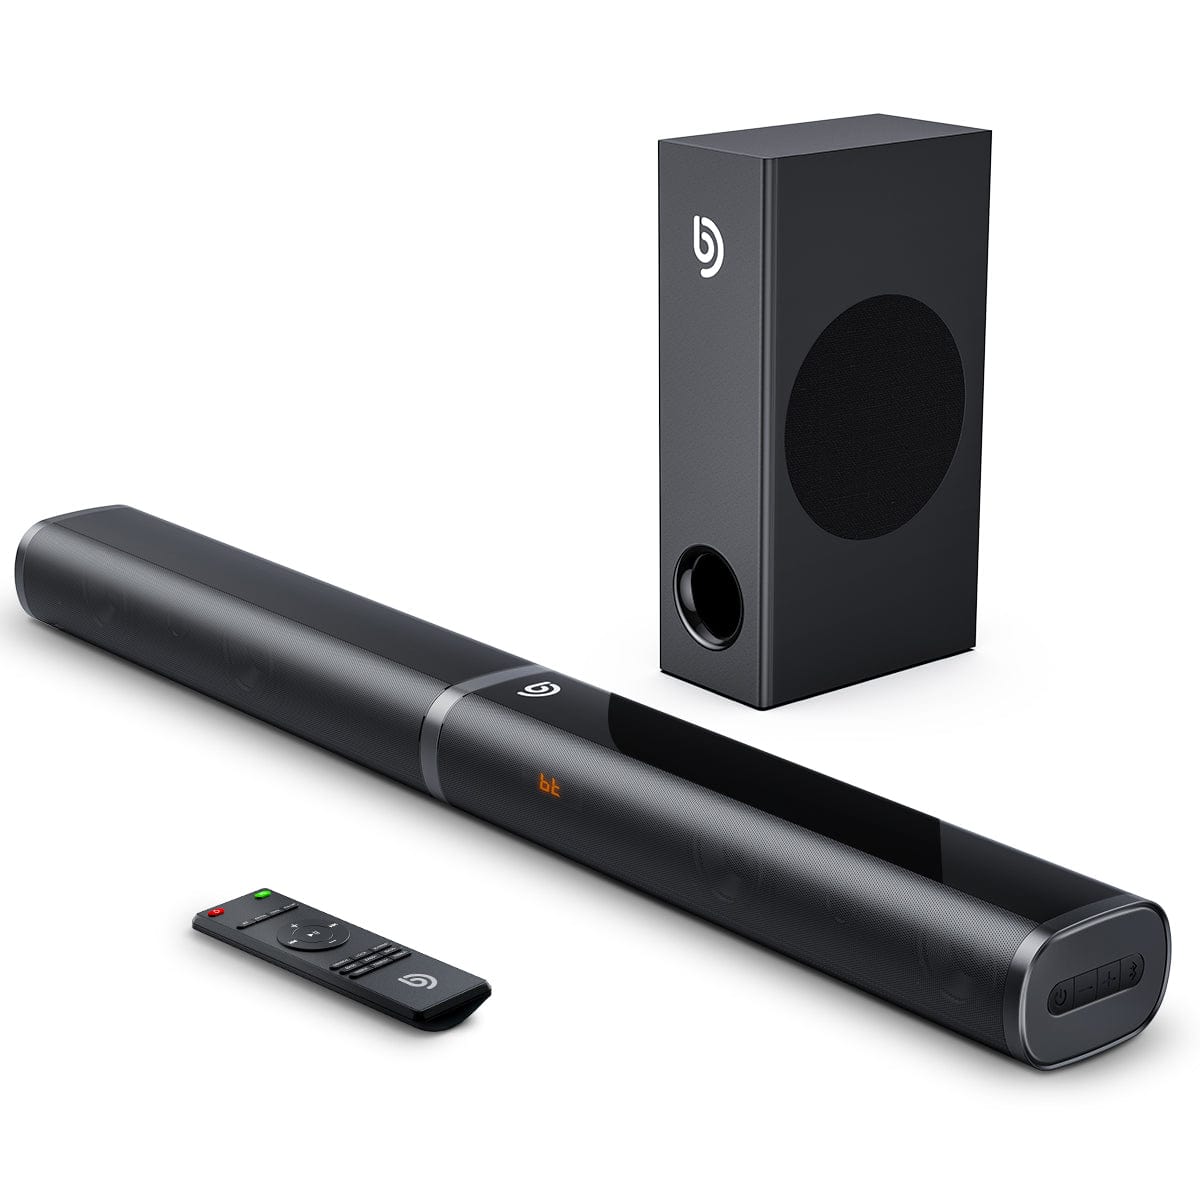 BOMAKER 190W SoundBars for TV with Subwoofer, 2.1,125dB, 6 EQ, 5 Bass Surround Sound for 4K &amp; HD TV, Optical/AUX/USB/ARC HDMI-Tapio III - Bomaker